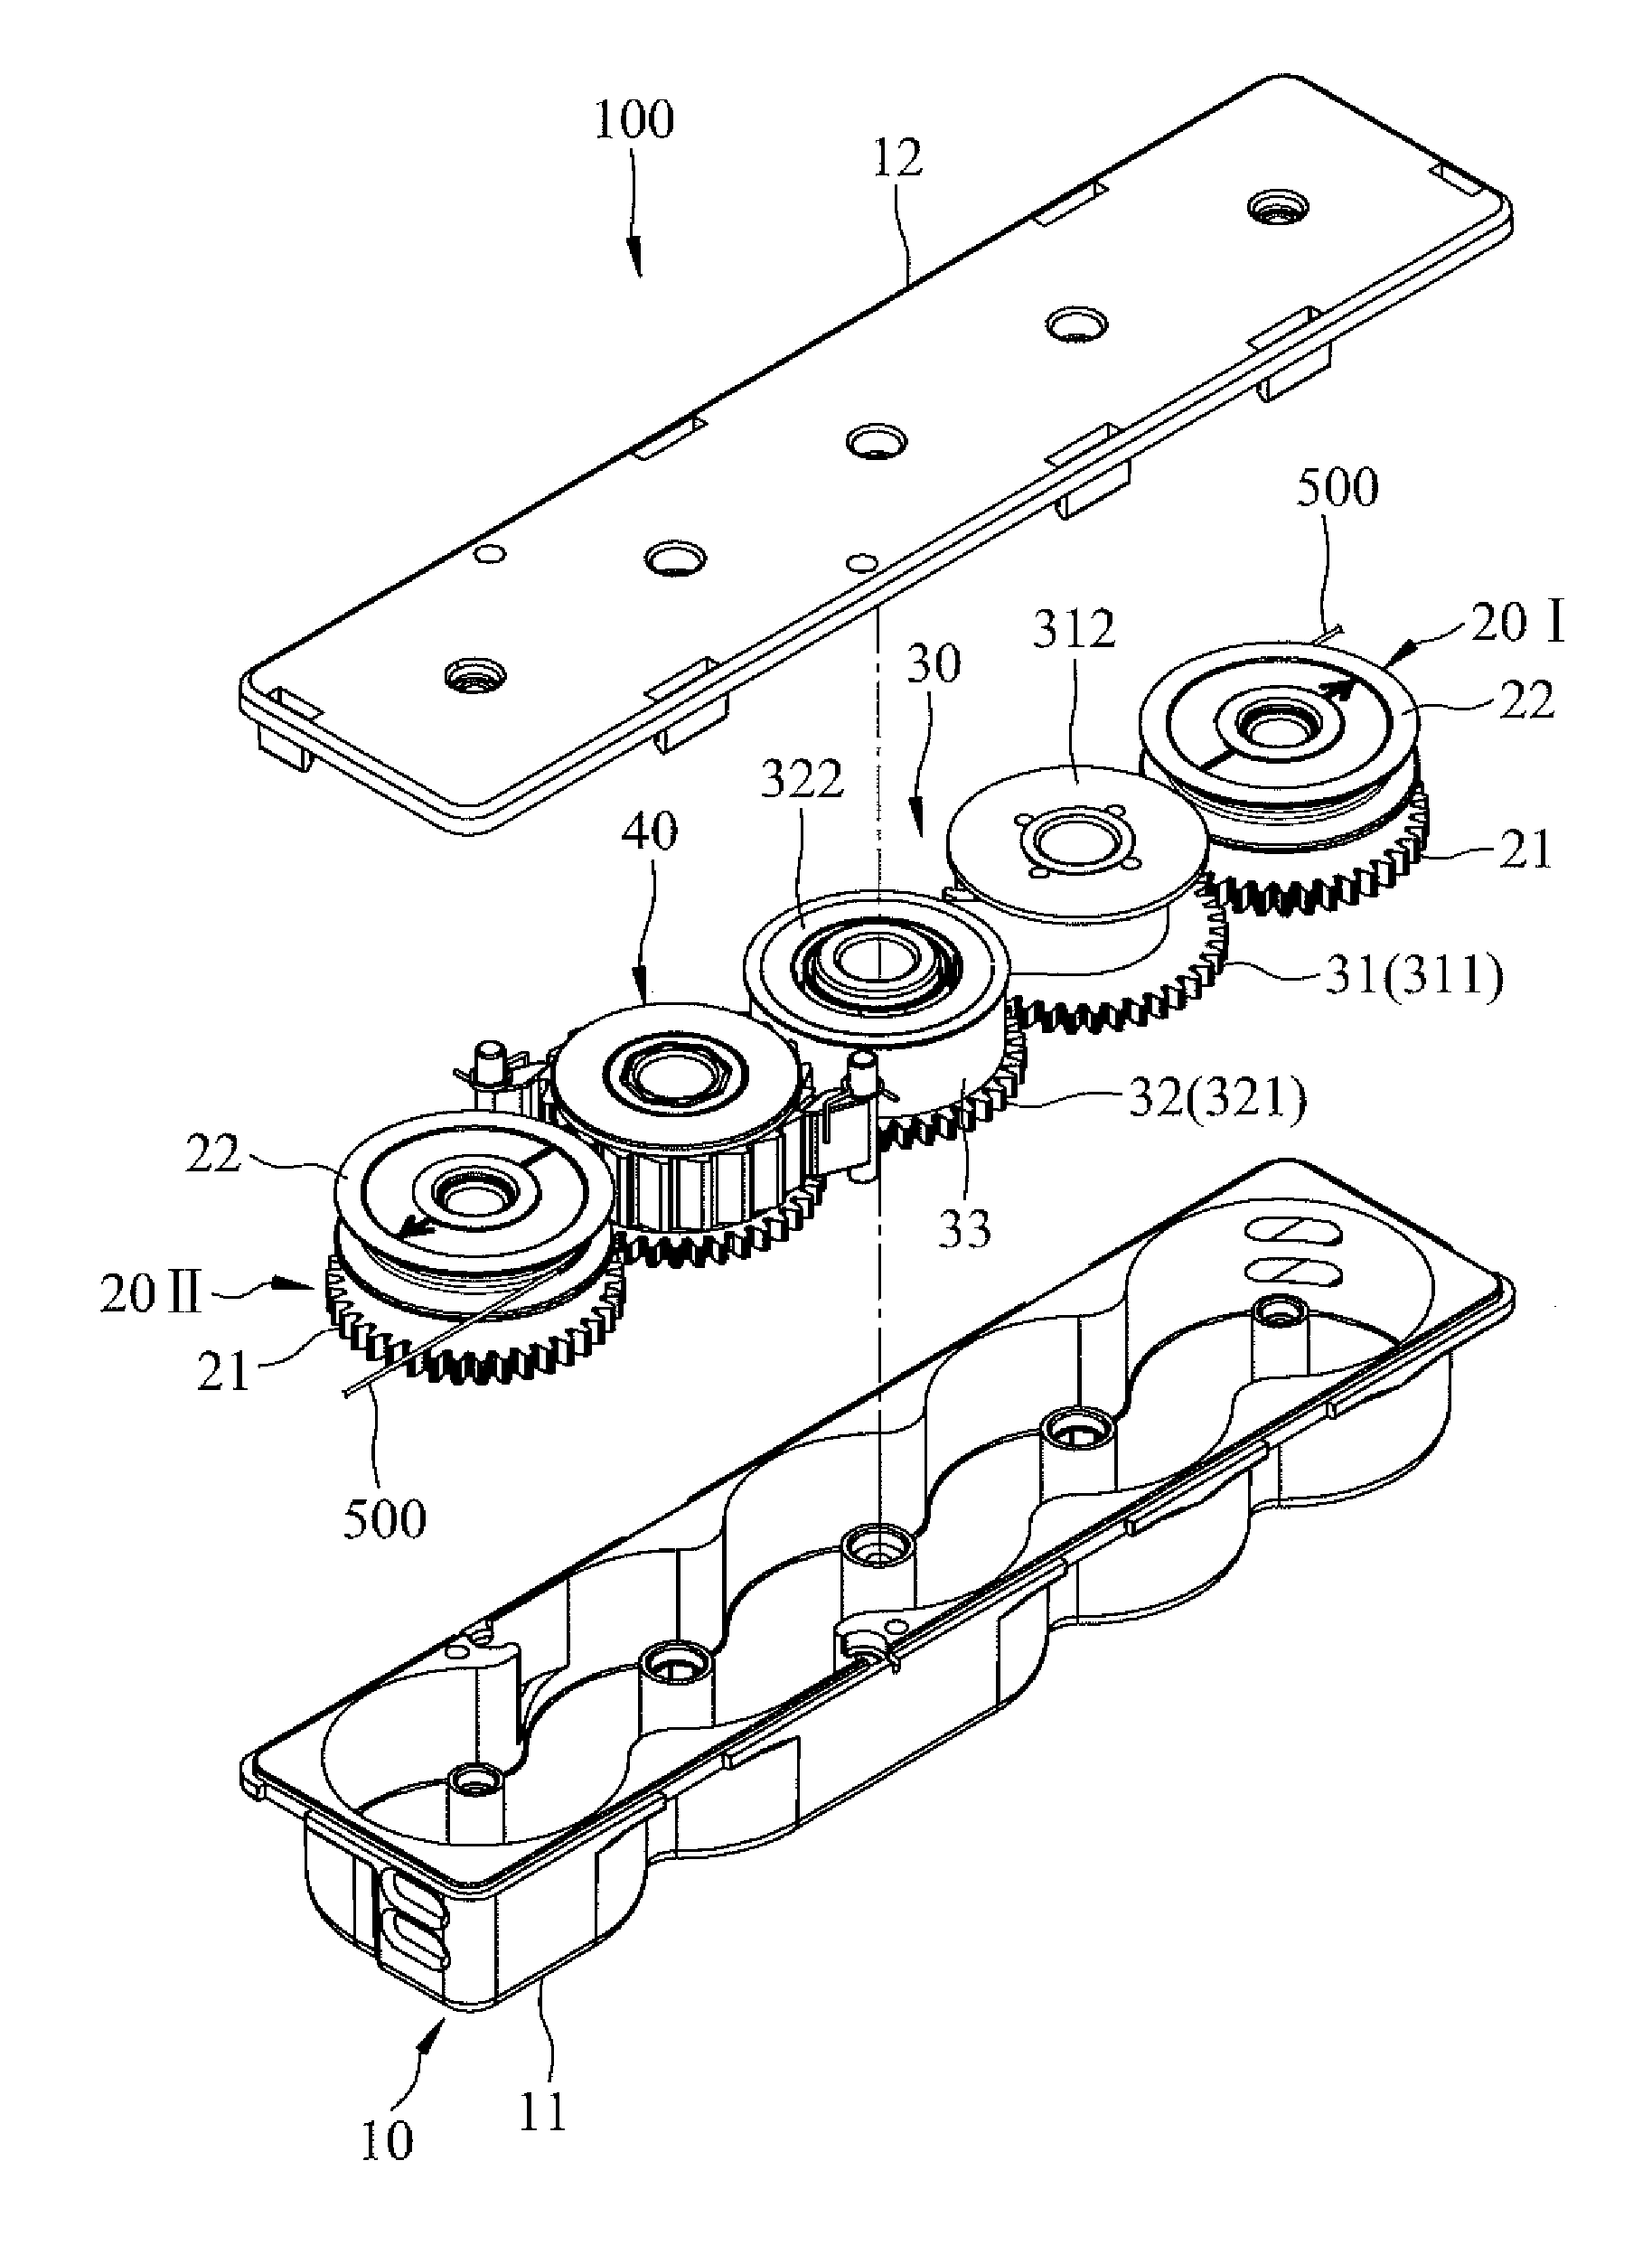 Cord-winding device for a venetian blind